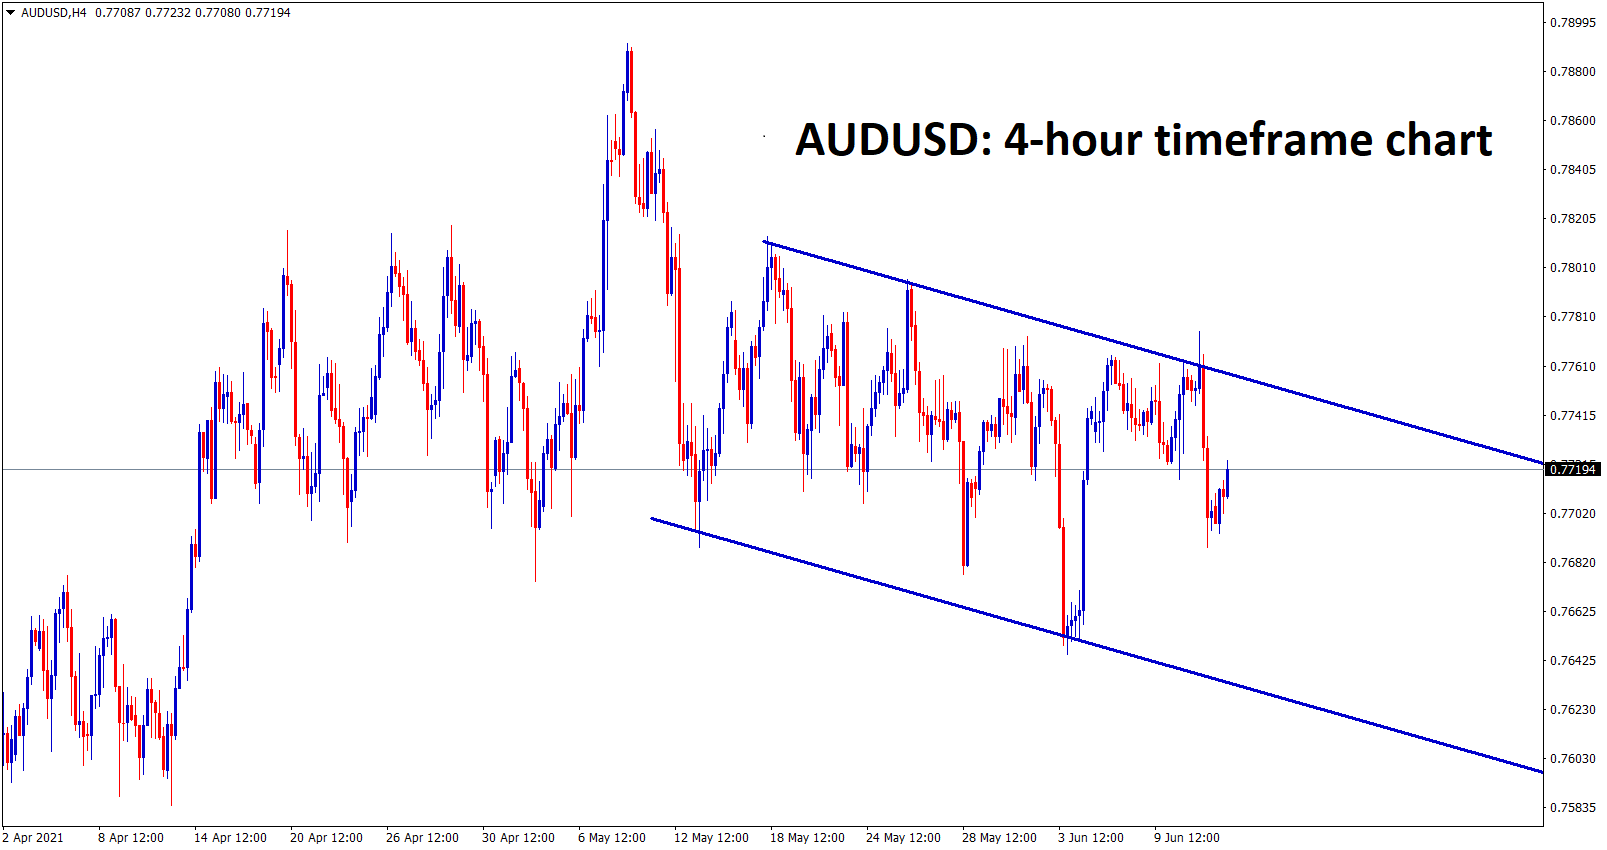 AUDUSD is moving up and down between the specific price boundary